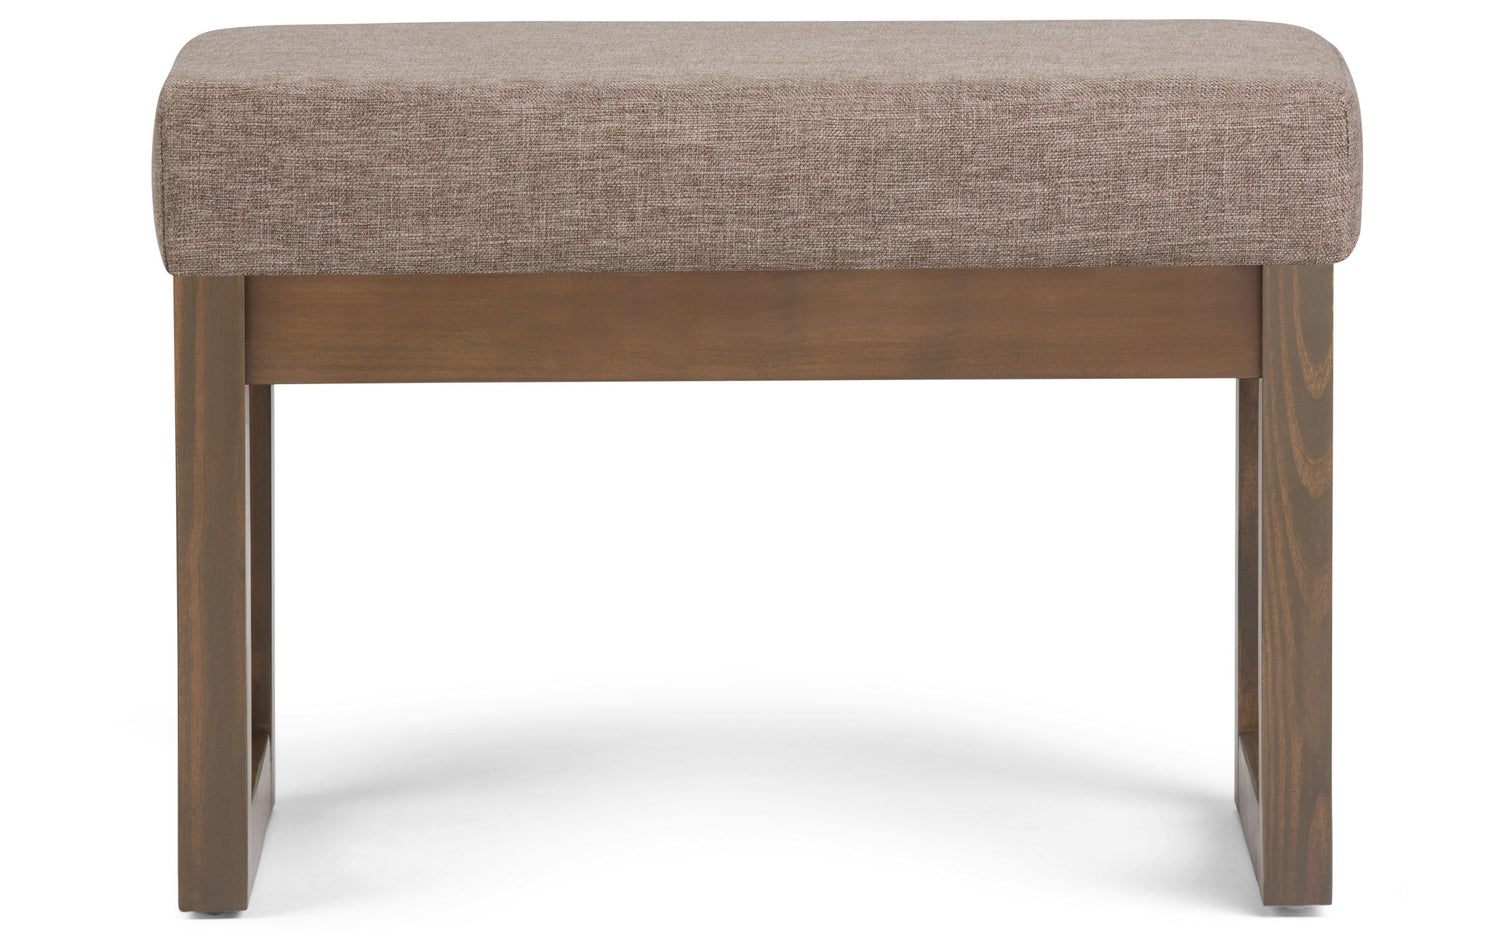 Fawn Brown Linen Style Fabric | Milltown Footstool Small Ottoman Bench